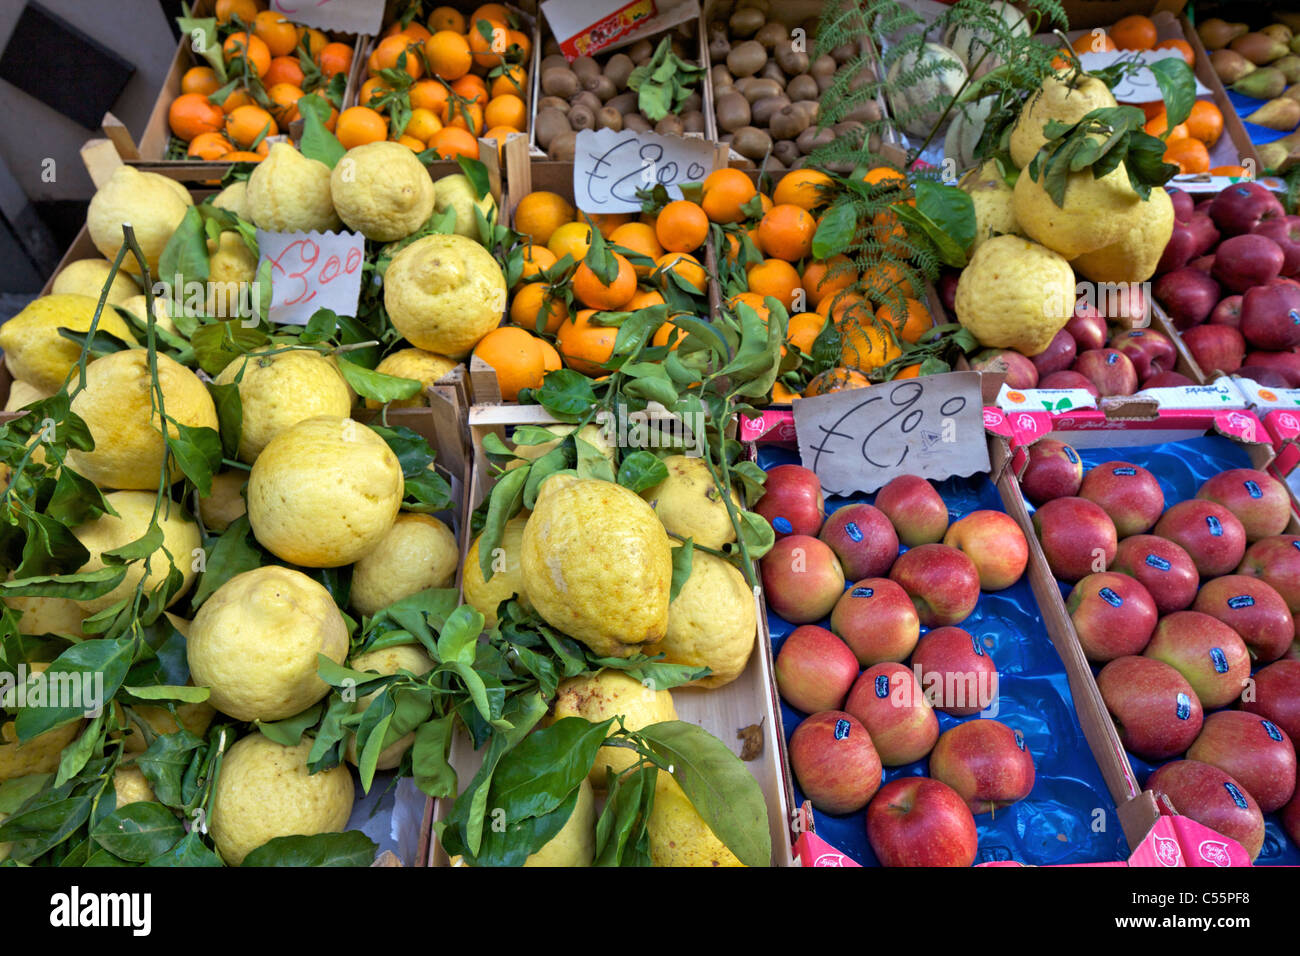 Fruits and vegetables at a market stall, Sorrento, Bay of Naples, Naples, Campania, Italy Stock Photo